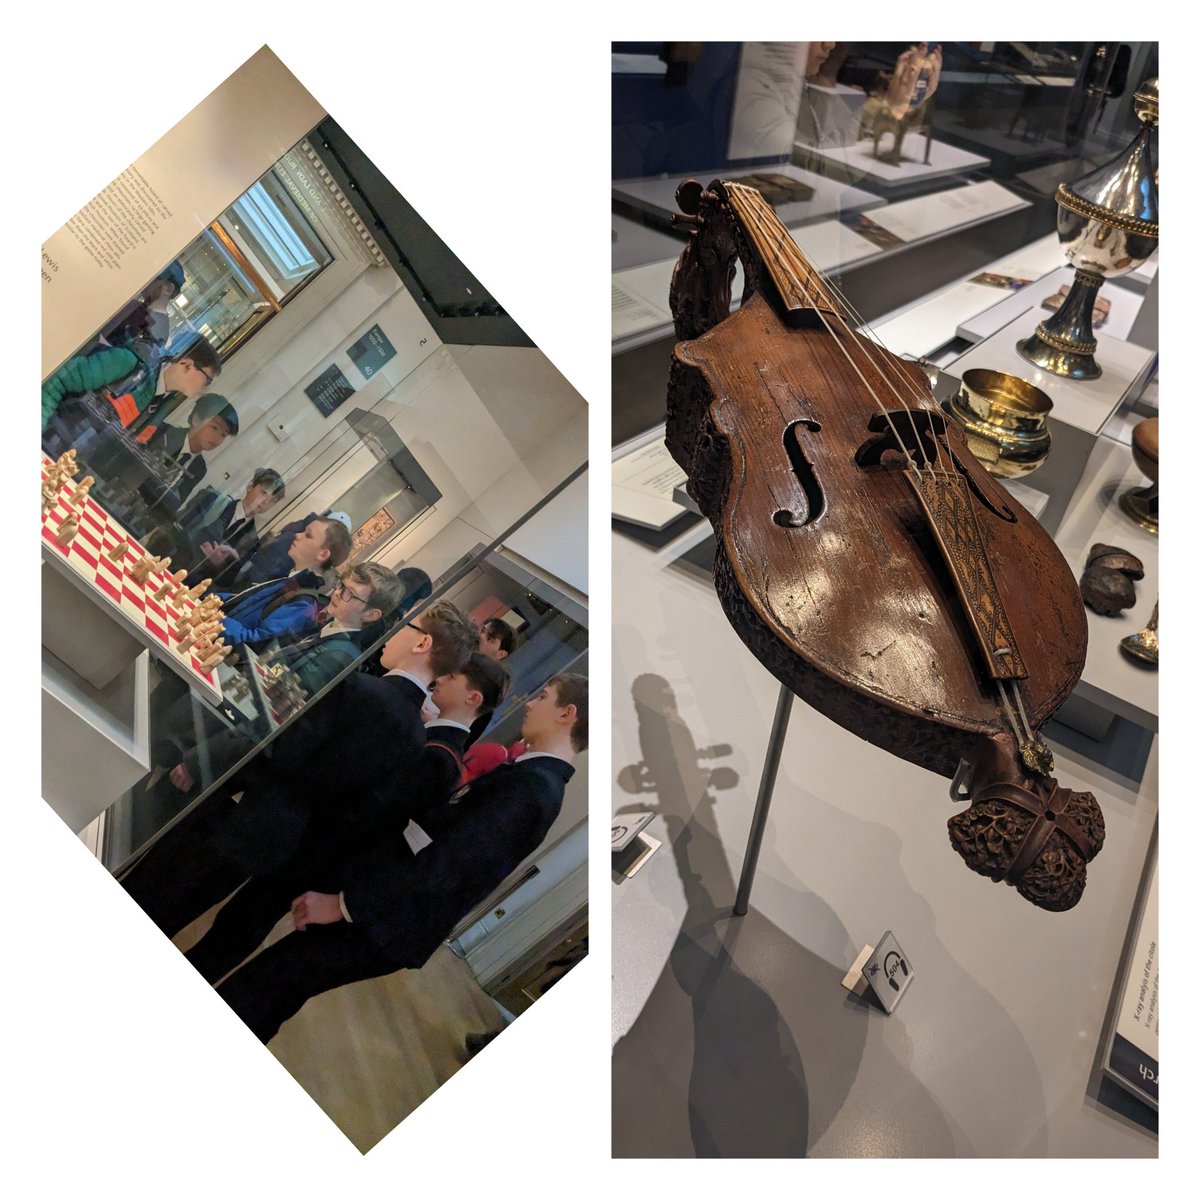 A lovely day combining learning about the walrus tusk chess set used in the Harry Potter films and 500 year old citoles. #verulamforlife #teachingmusic #thebritishmuseum #curriculumenrichment #earlymusic